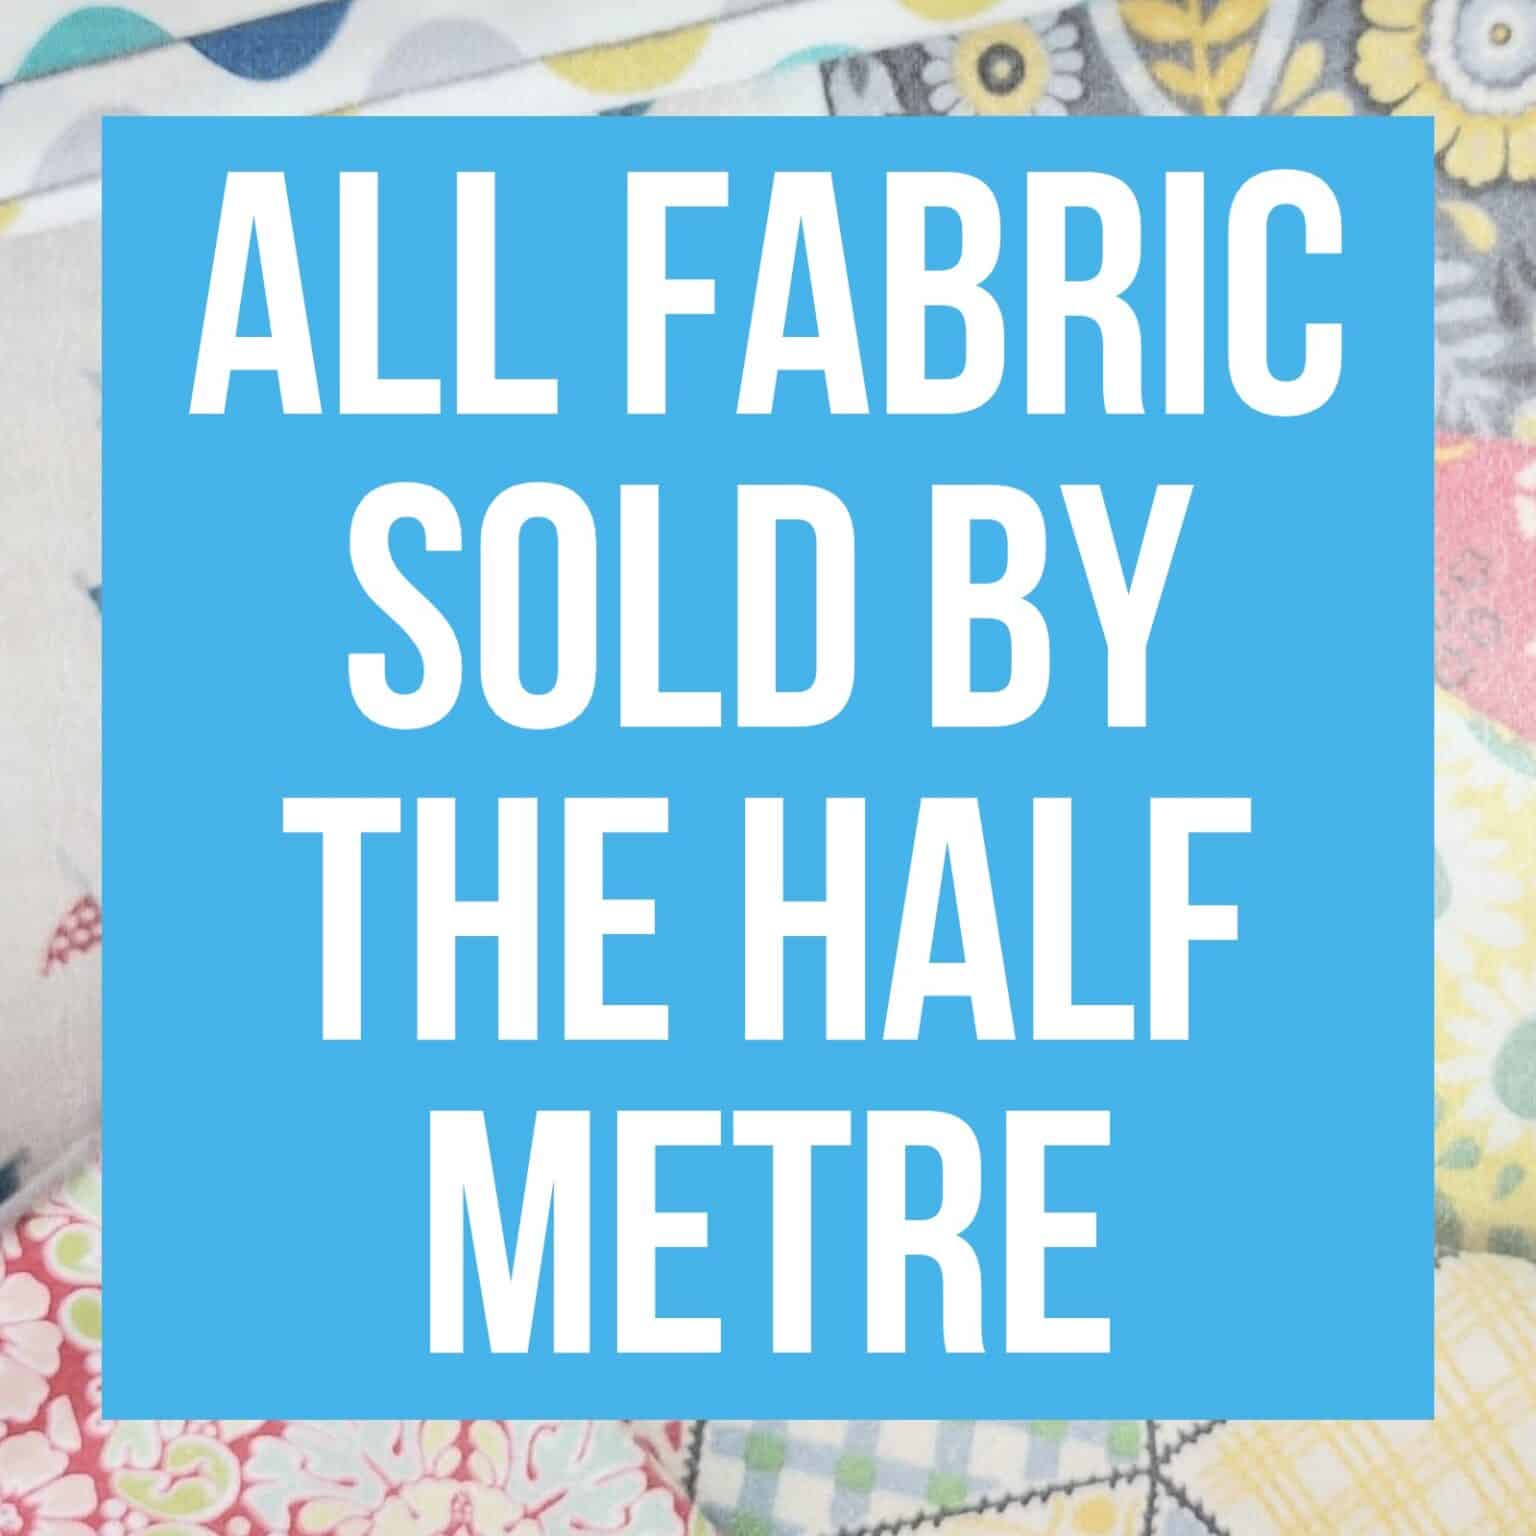 all fabric is sold by the hafl metre at More Sewing